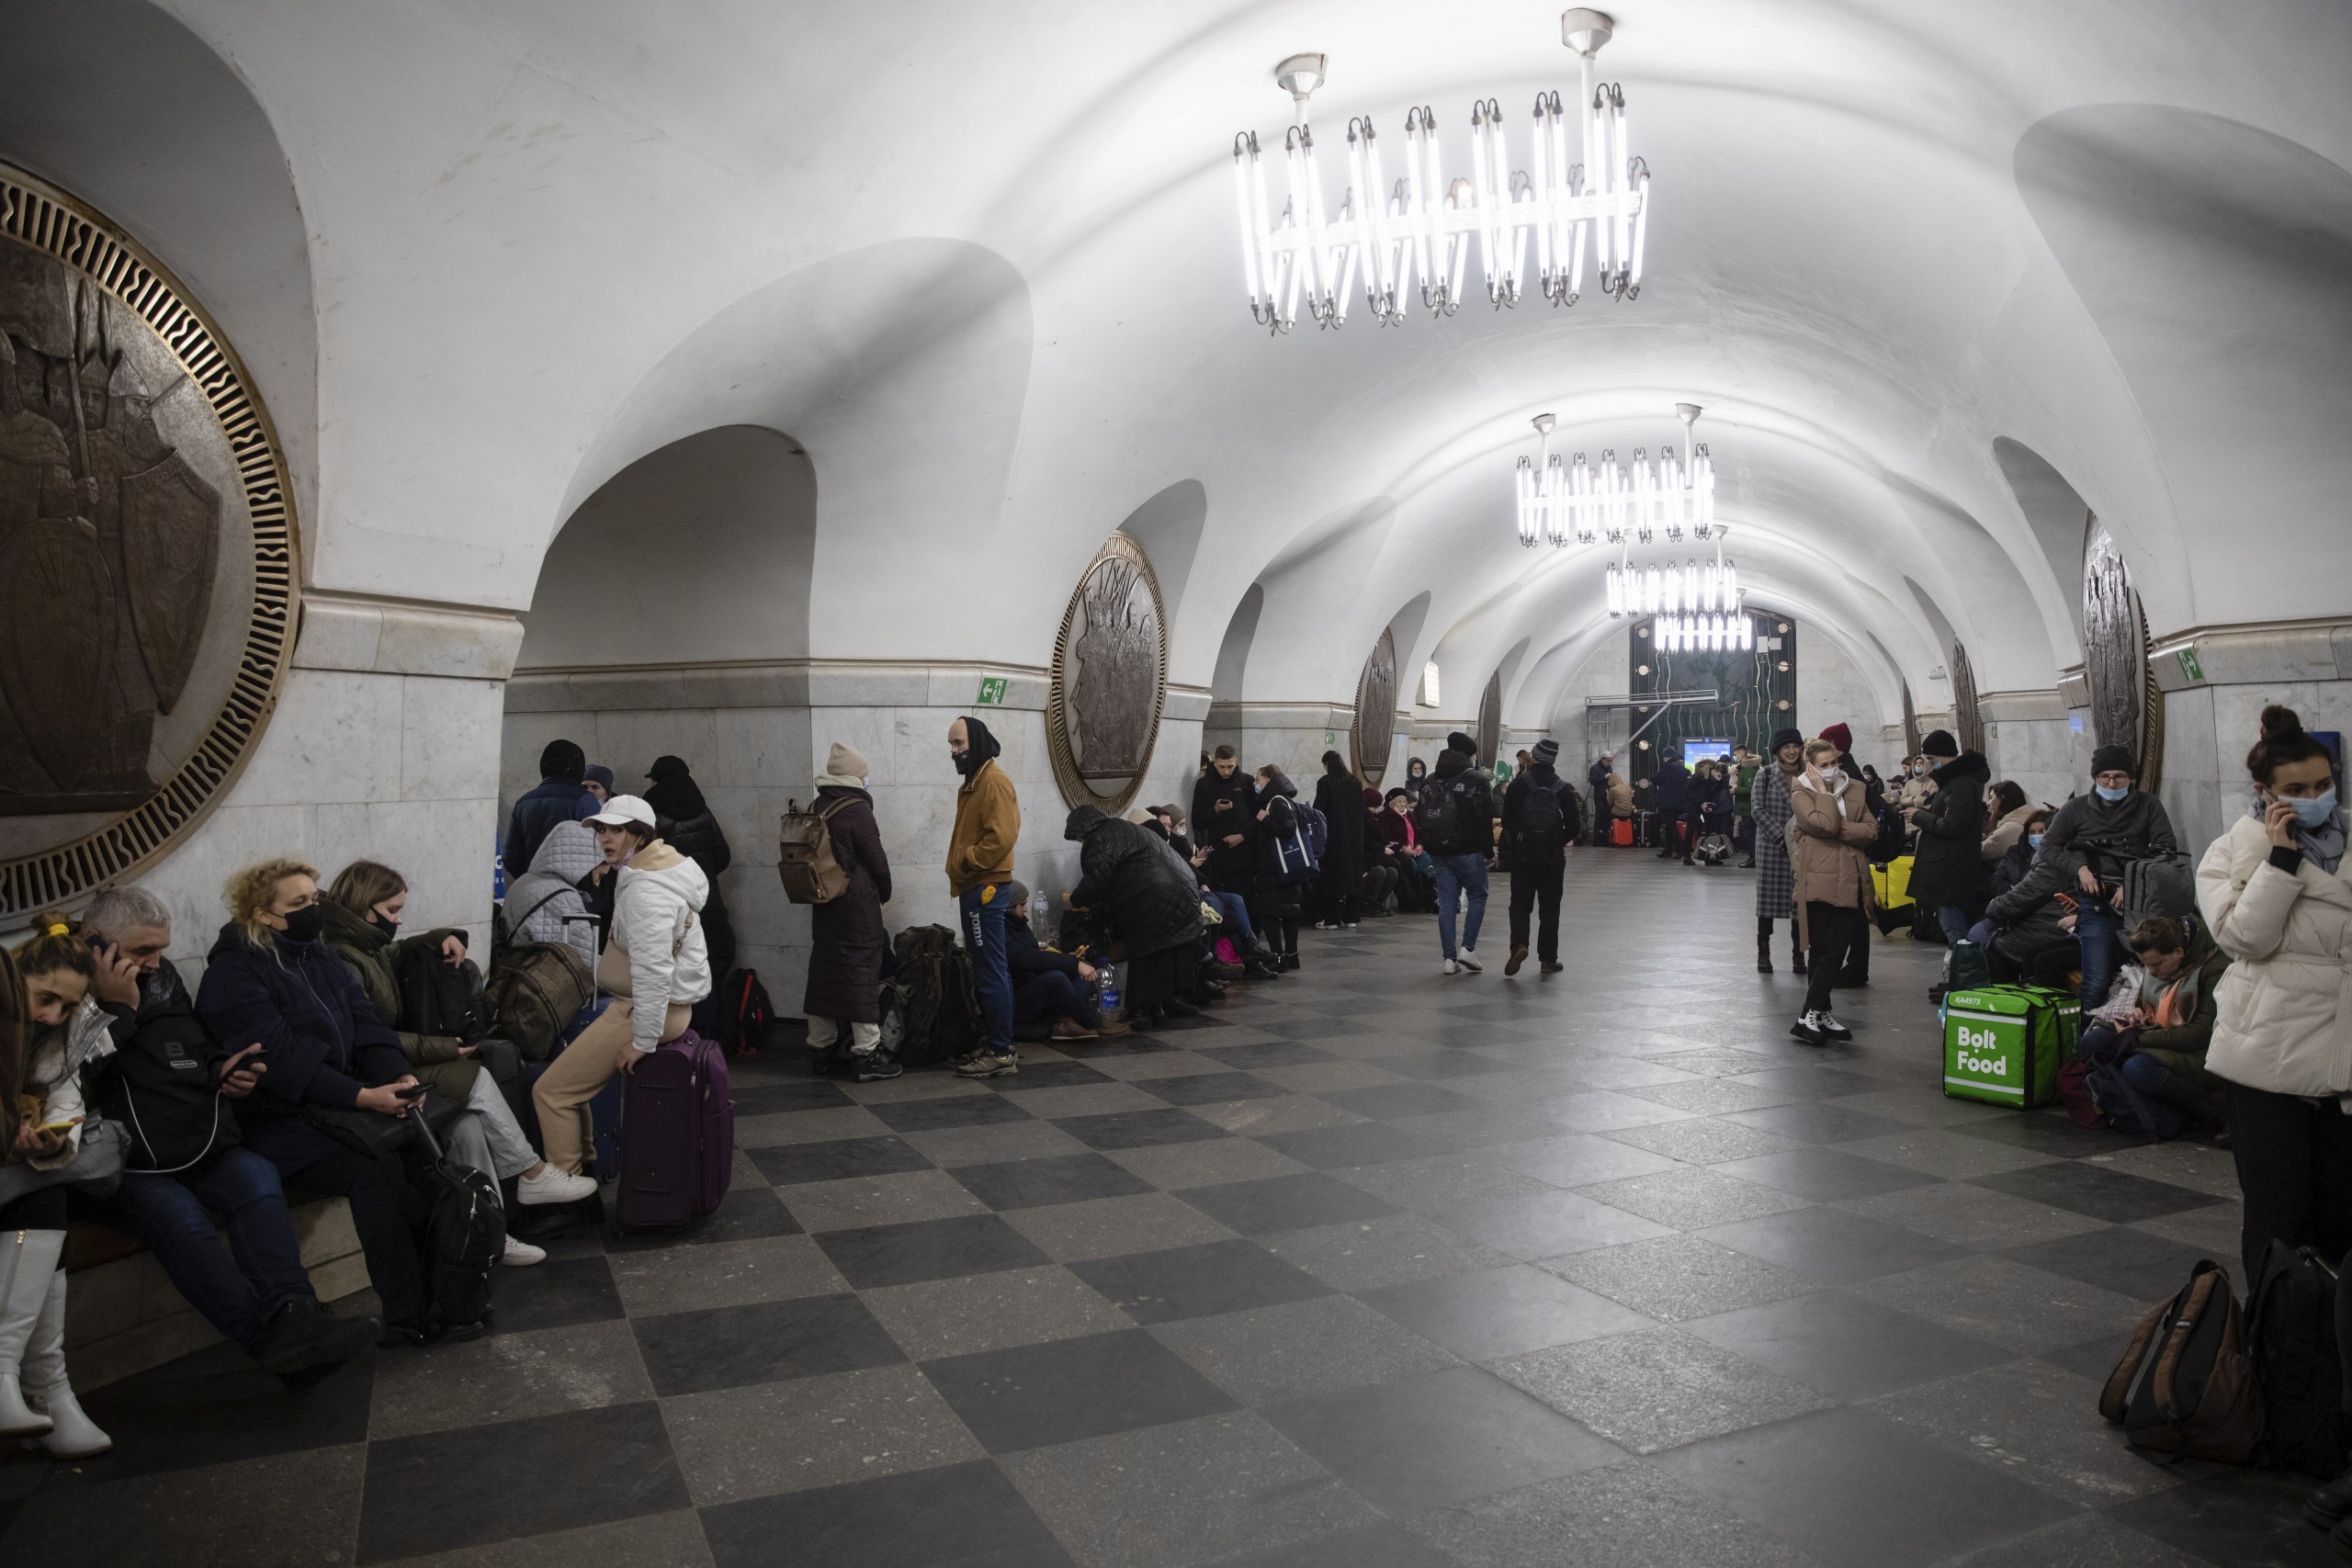 epa09782634 Ukrainians take shelter in a metro station for the coming night in Kiev, Ukraine, 24 February 2022. Russian troops launched a major military operation on Ukraine on 24 February, after weeks of intense diplomacy and the imposition of Western sanctions on Russia aimed at preventing an armed conflict in Ukraine.  EPA/MIKHAIL PALINCHAK